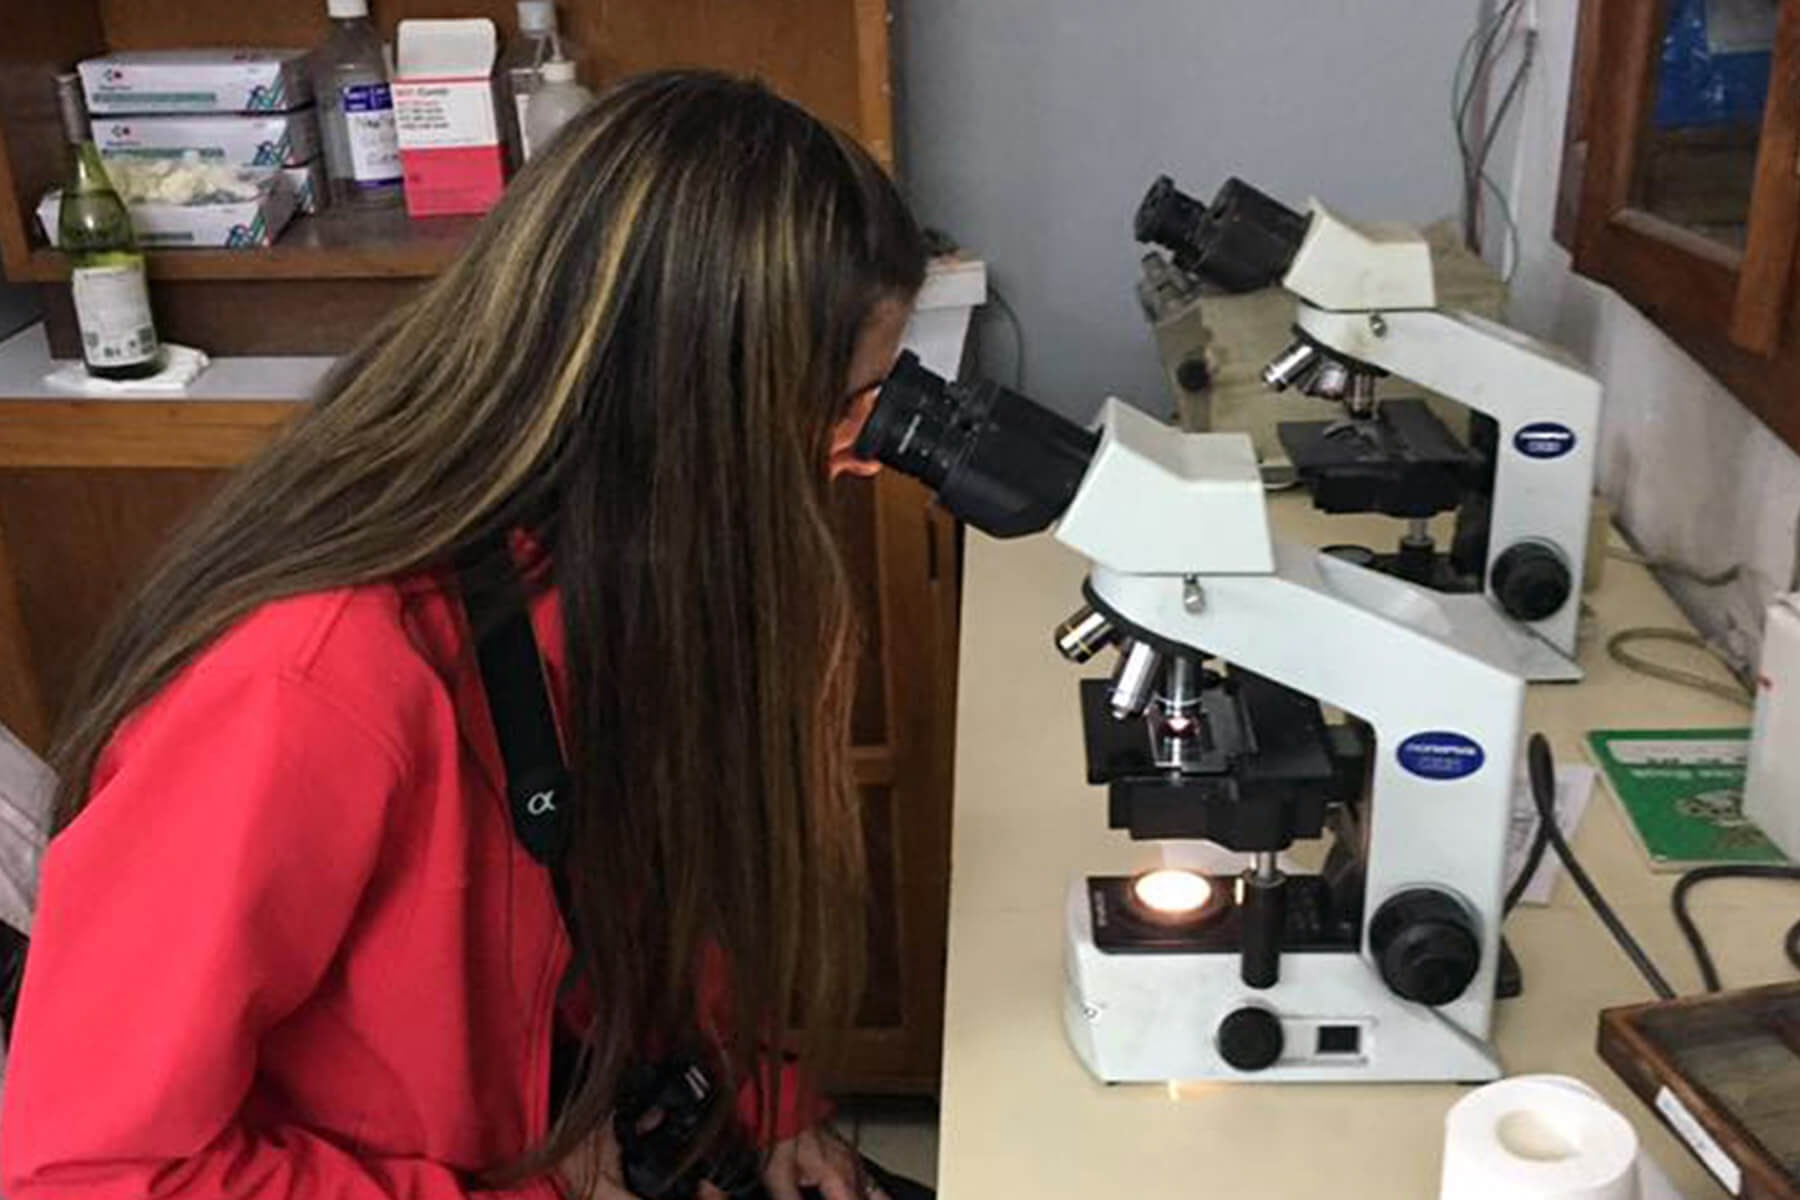 Lisa seeing leprosy bacteria at Anandaban Research Centre, a world-leading research facility for Reaction studies